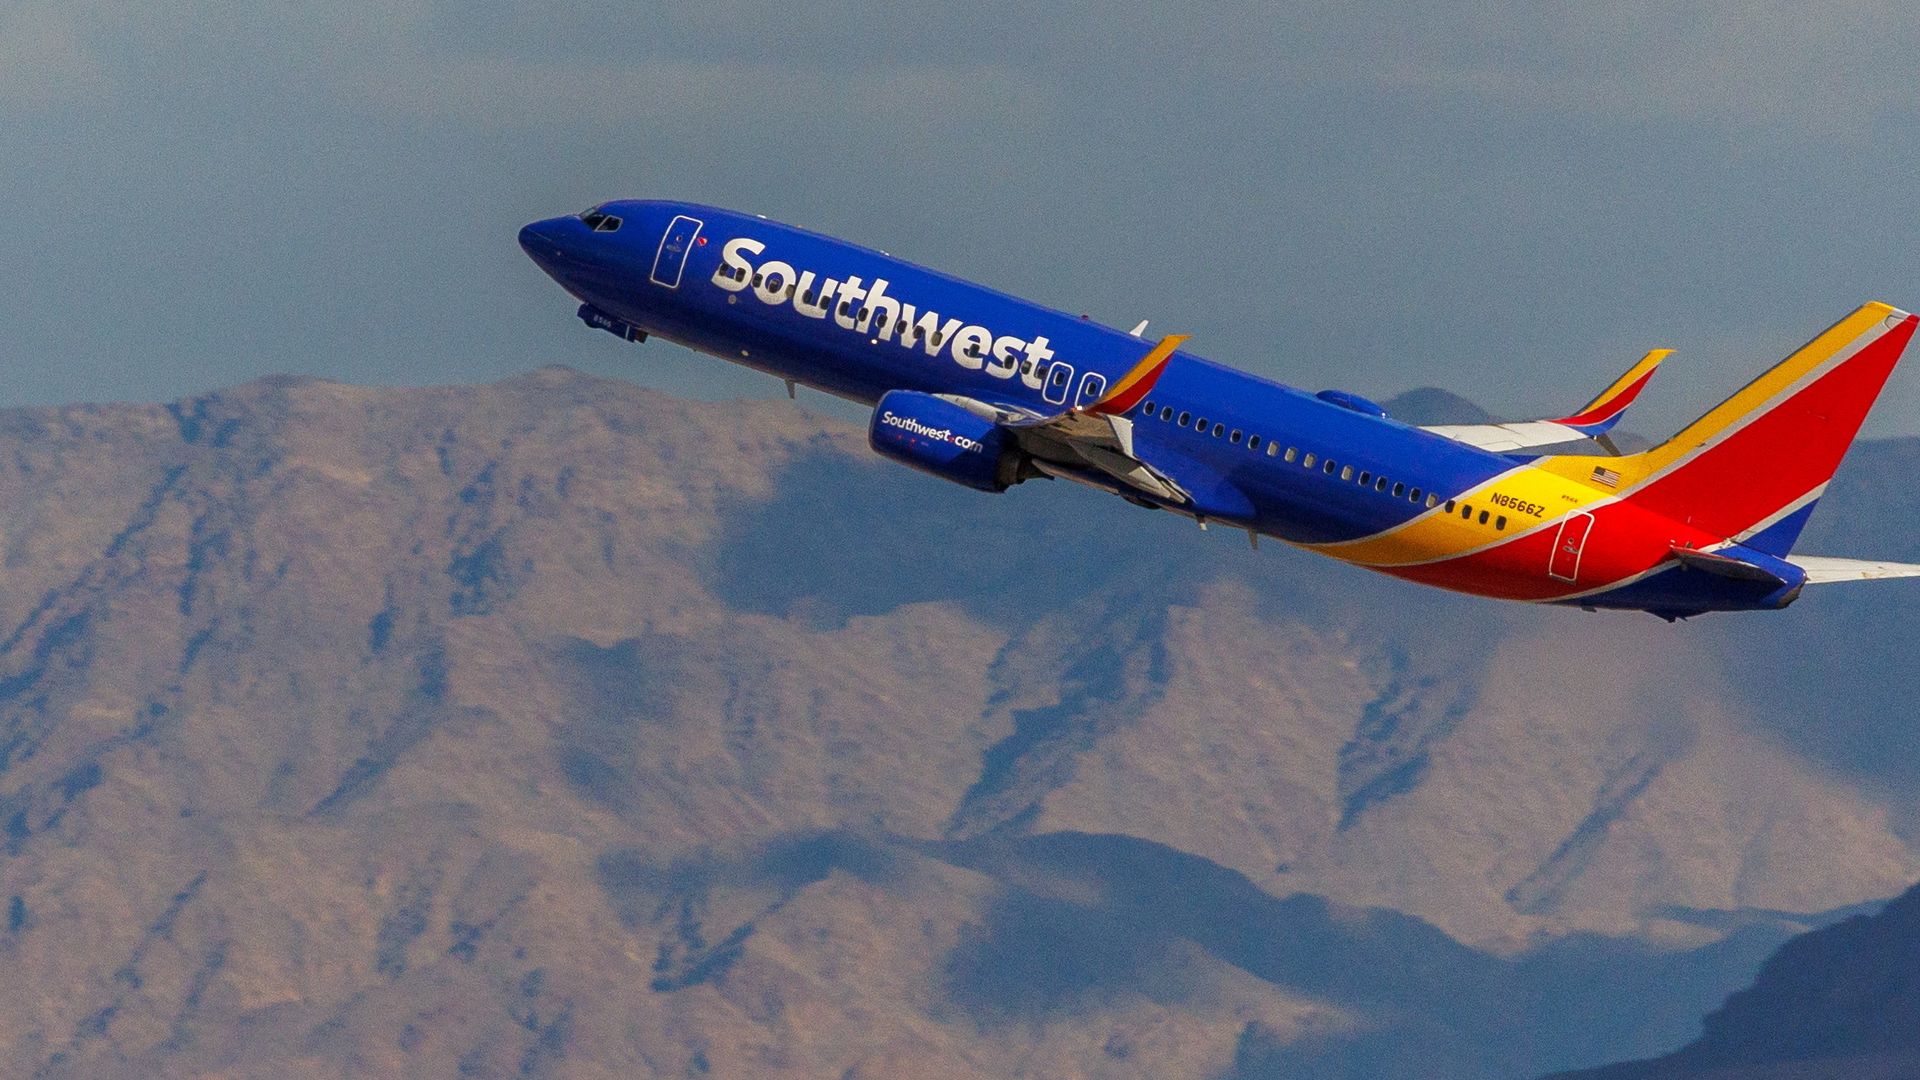 The FAA is investigating an incident where a Southwest Airlines jet flew dangerously close to an Oklahoma neighborhood.